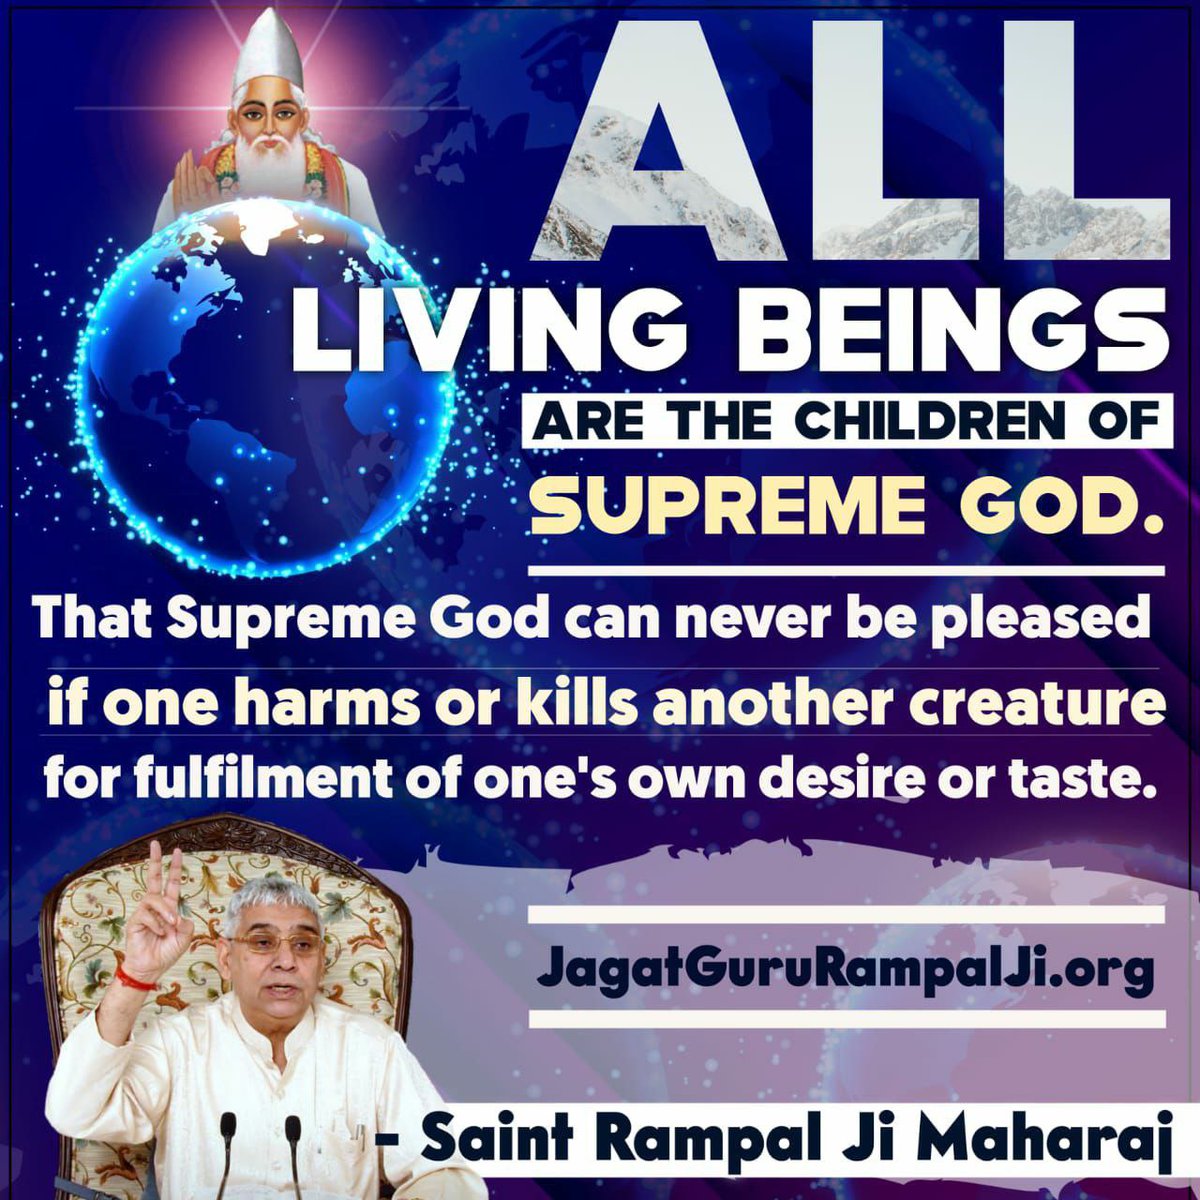 #GodMorningWednesday
Supreme God Kabir Ji condemned the practices and rituals of meat eating and following arbitrary orthodox practices.
- Sant Rampal Ji Maharaj
#wednesdaythought
#WednesdayMotivation